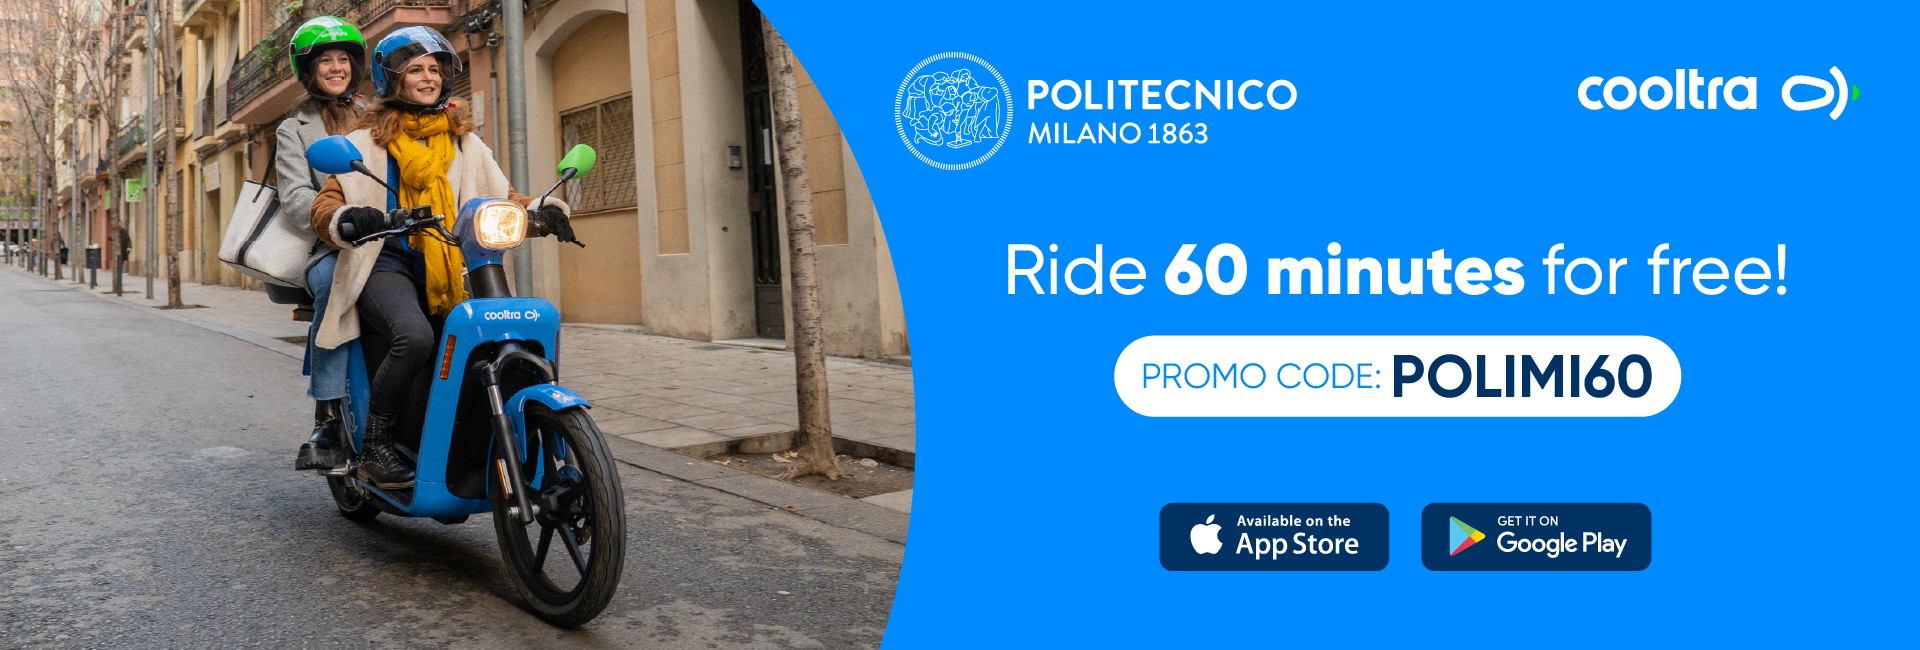 Ride 60 minutes for free! PROMO CODE: POLIMI60